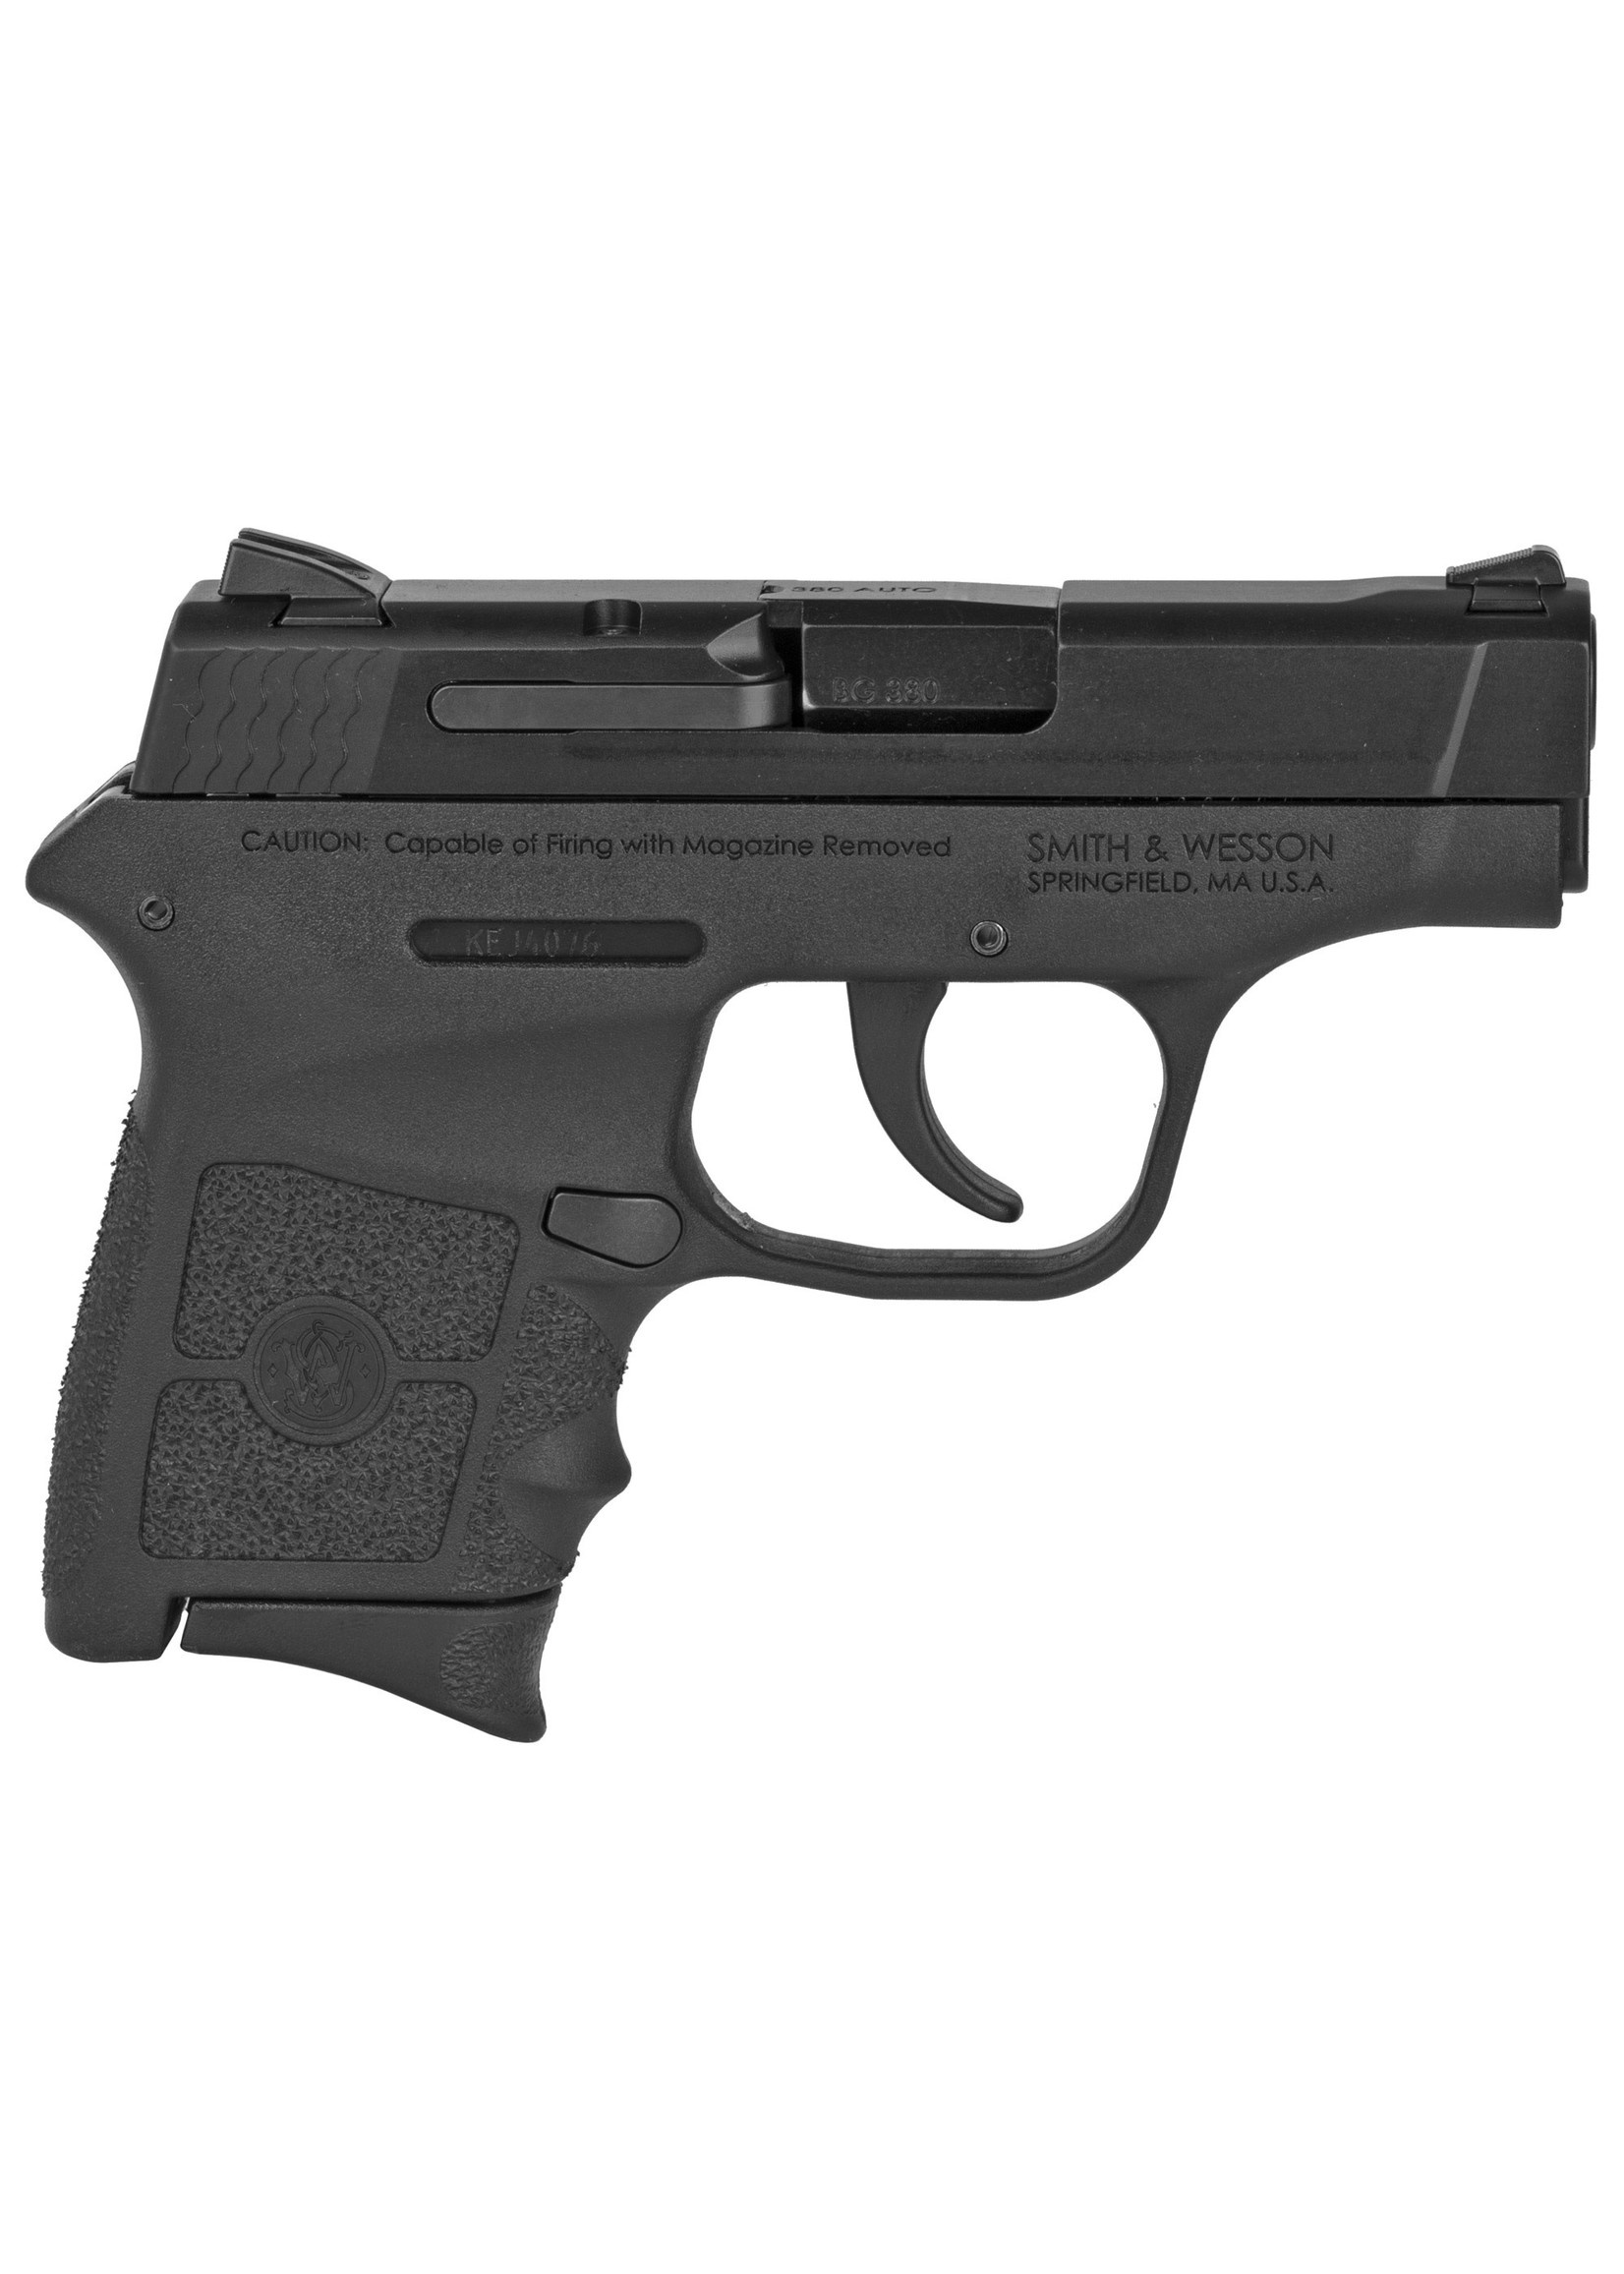 Smith and Wesson (S&W) Smith & Wesson M&P Bodyguard 380 Pistol, 380 Auto